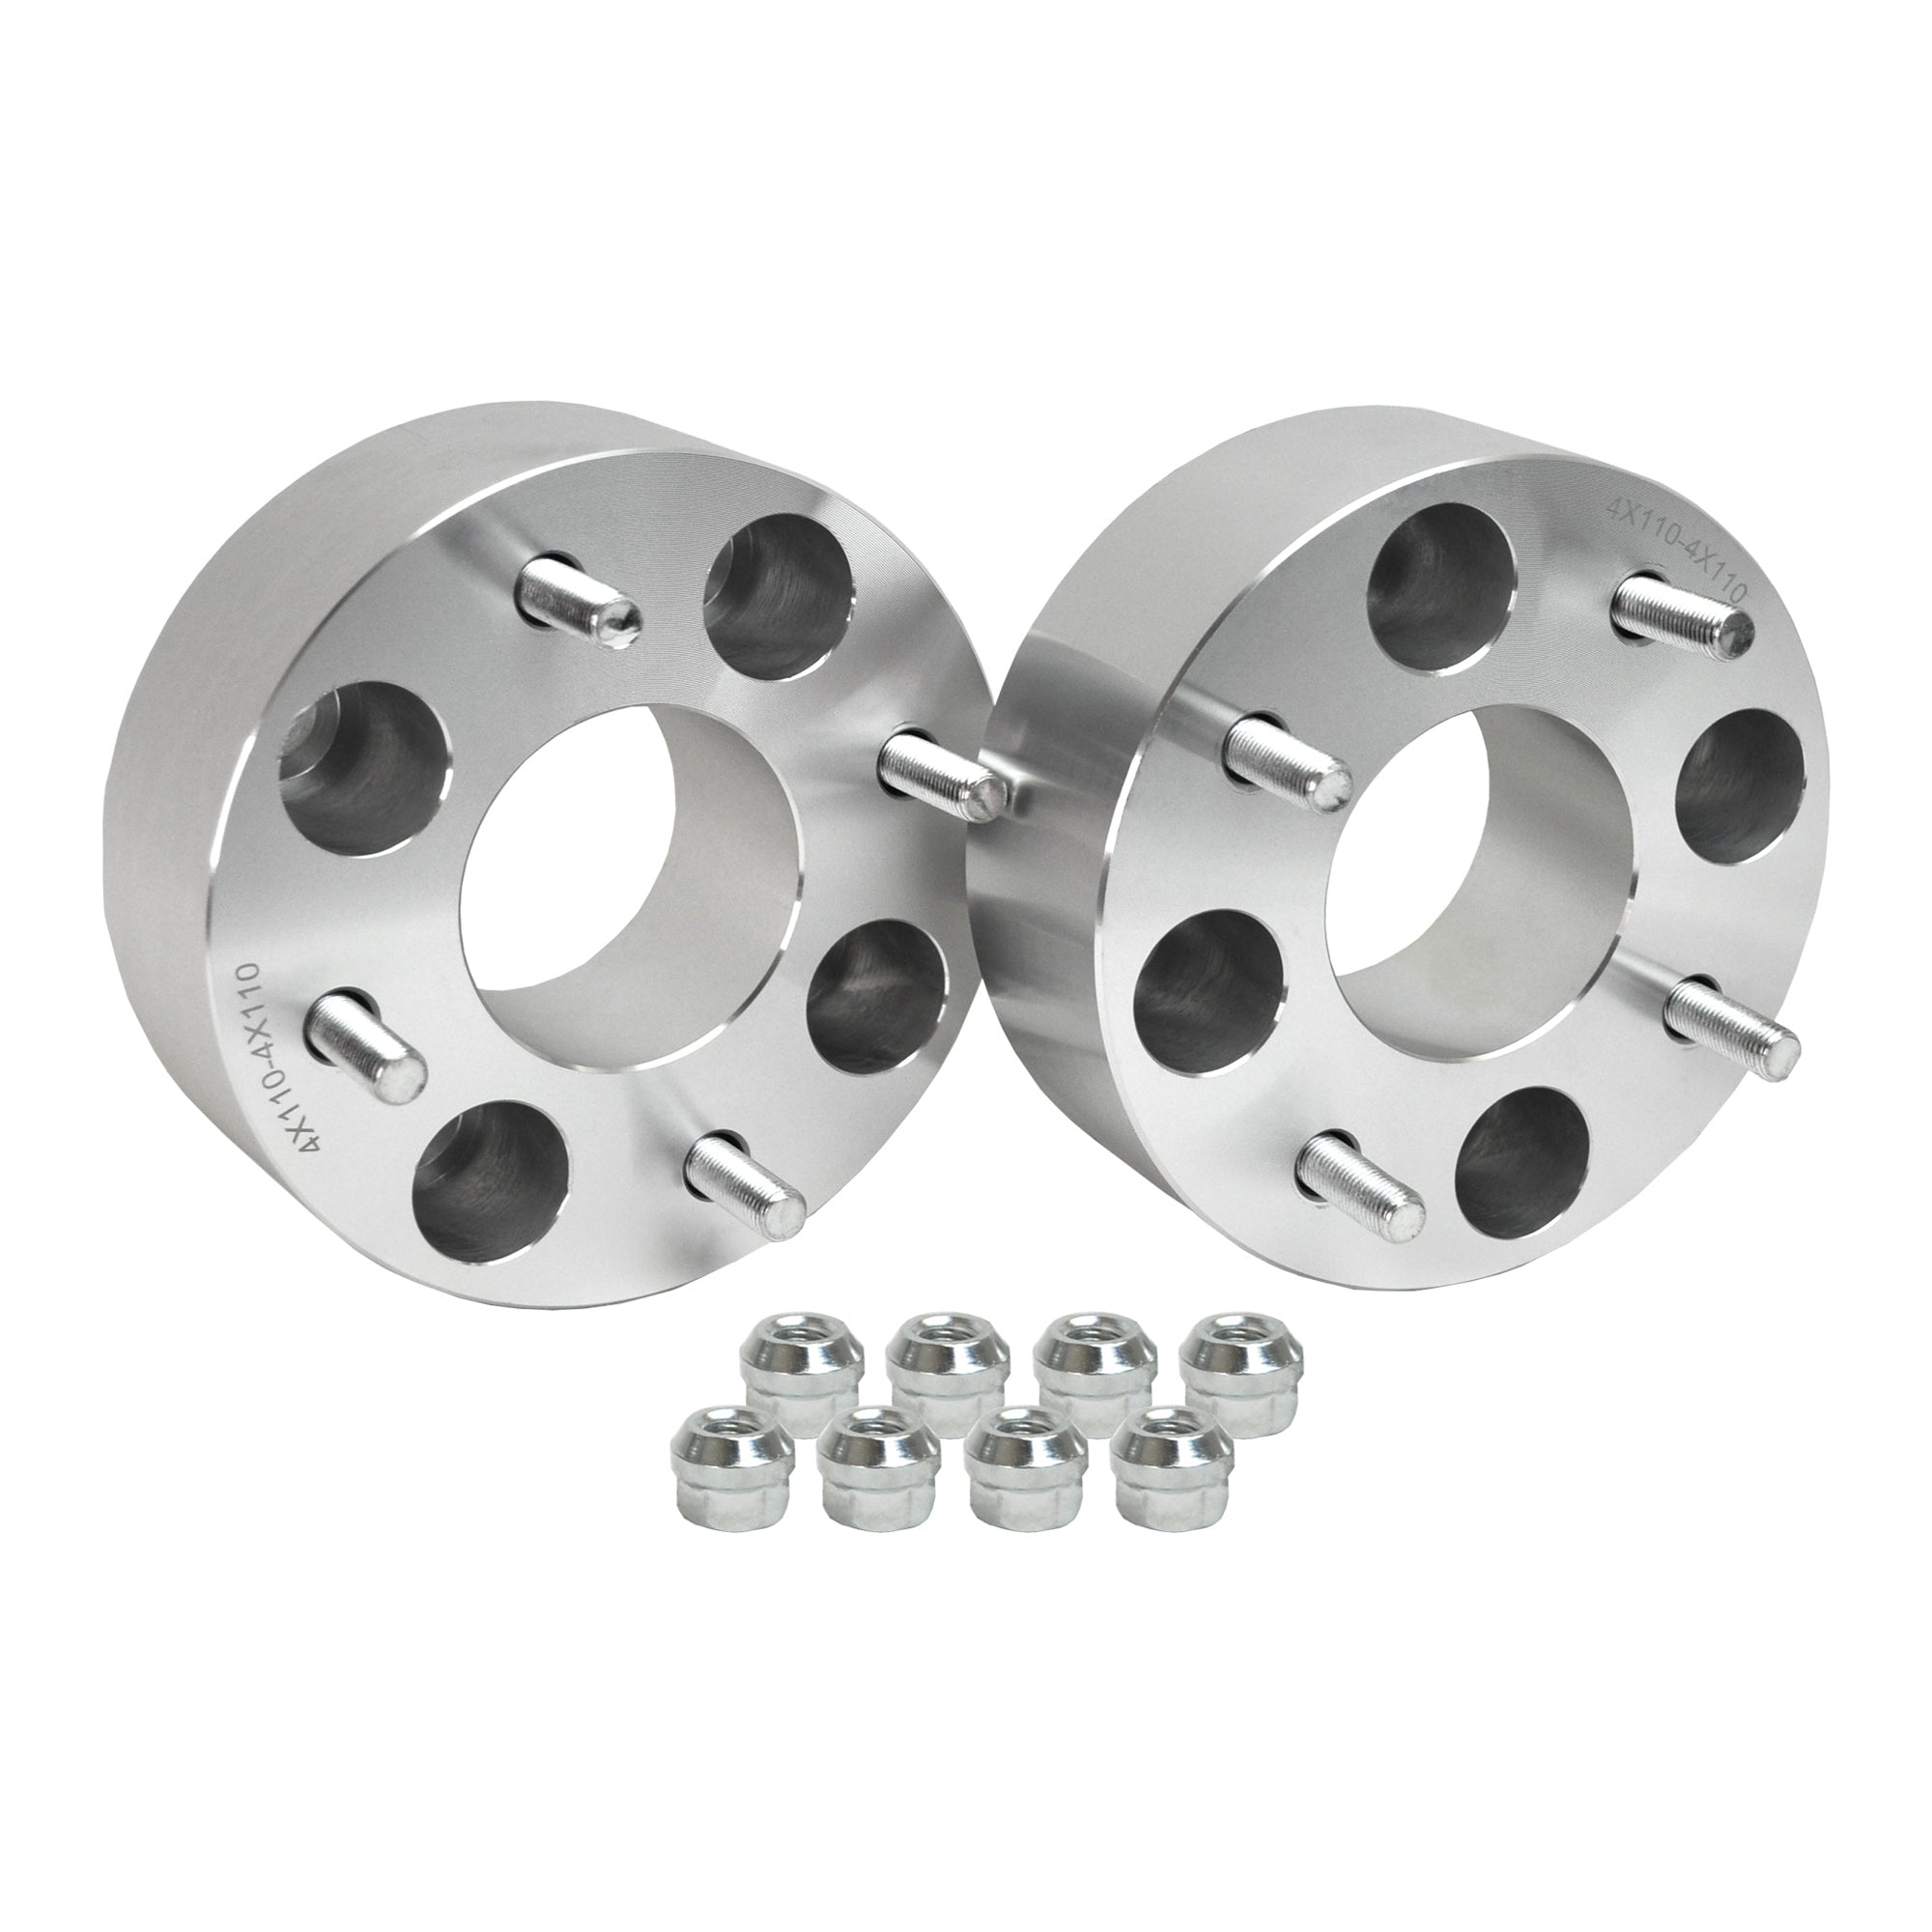 Wheel Spacer for Yamaha Grizzly 400 